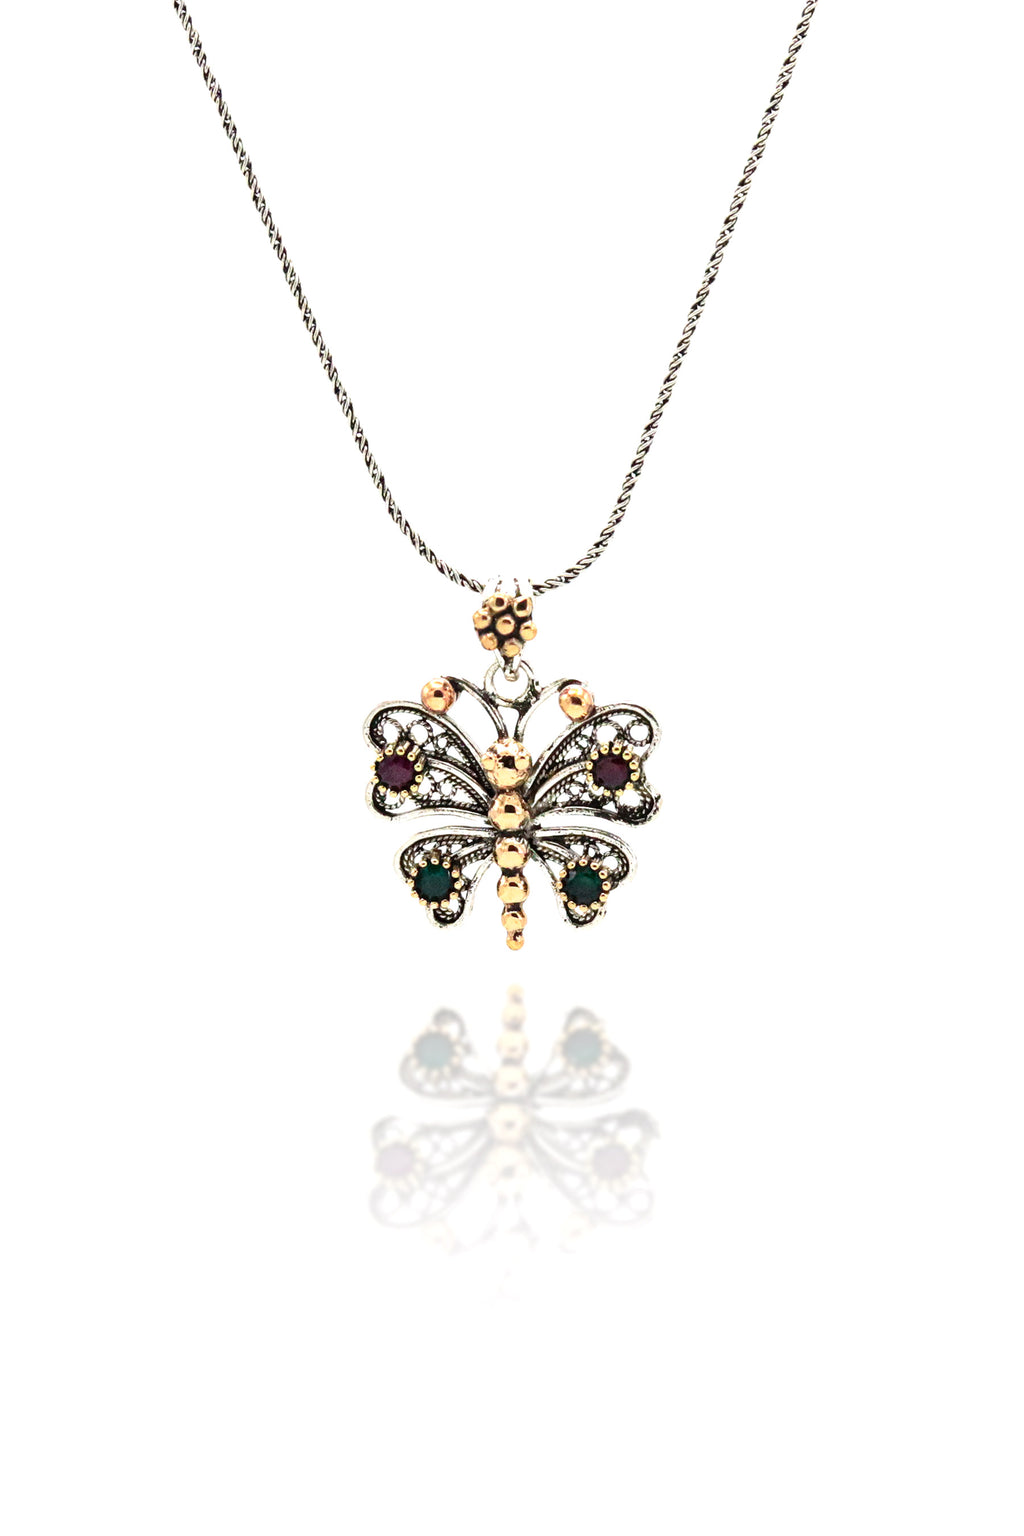 Butterfly Model Fringed Filigree Silver Necklace (NG201019410)